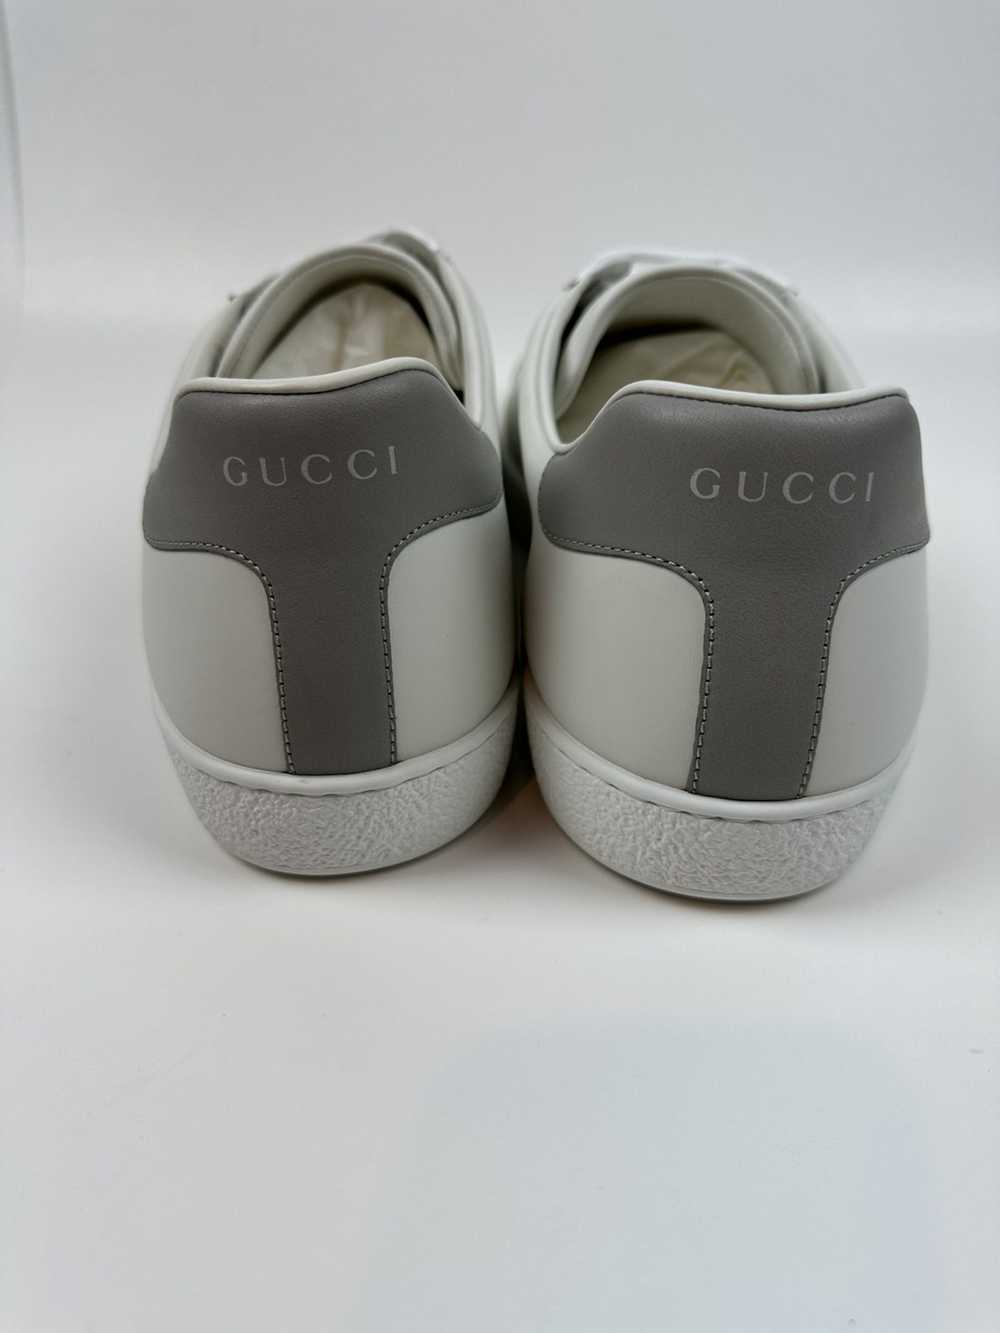 Gucci Gucci Ace Perforated GG Sneakers - image 5